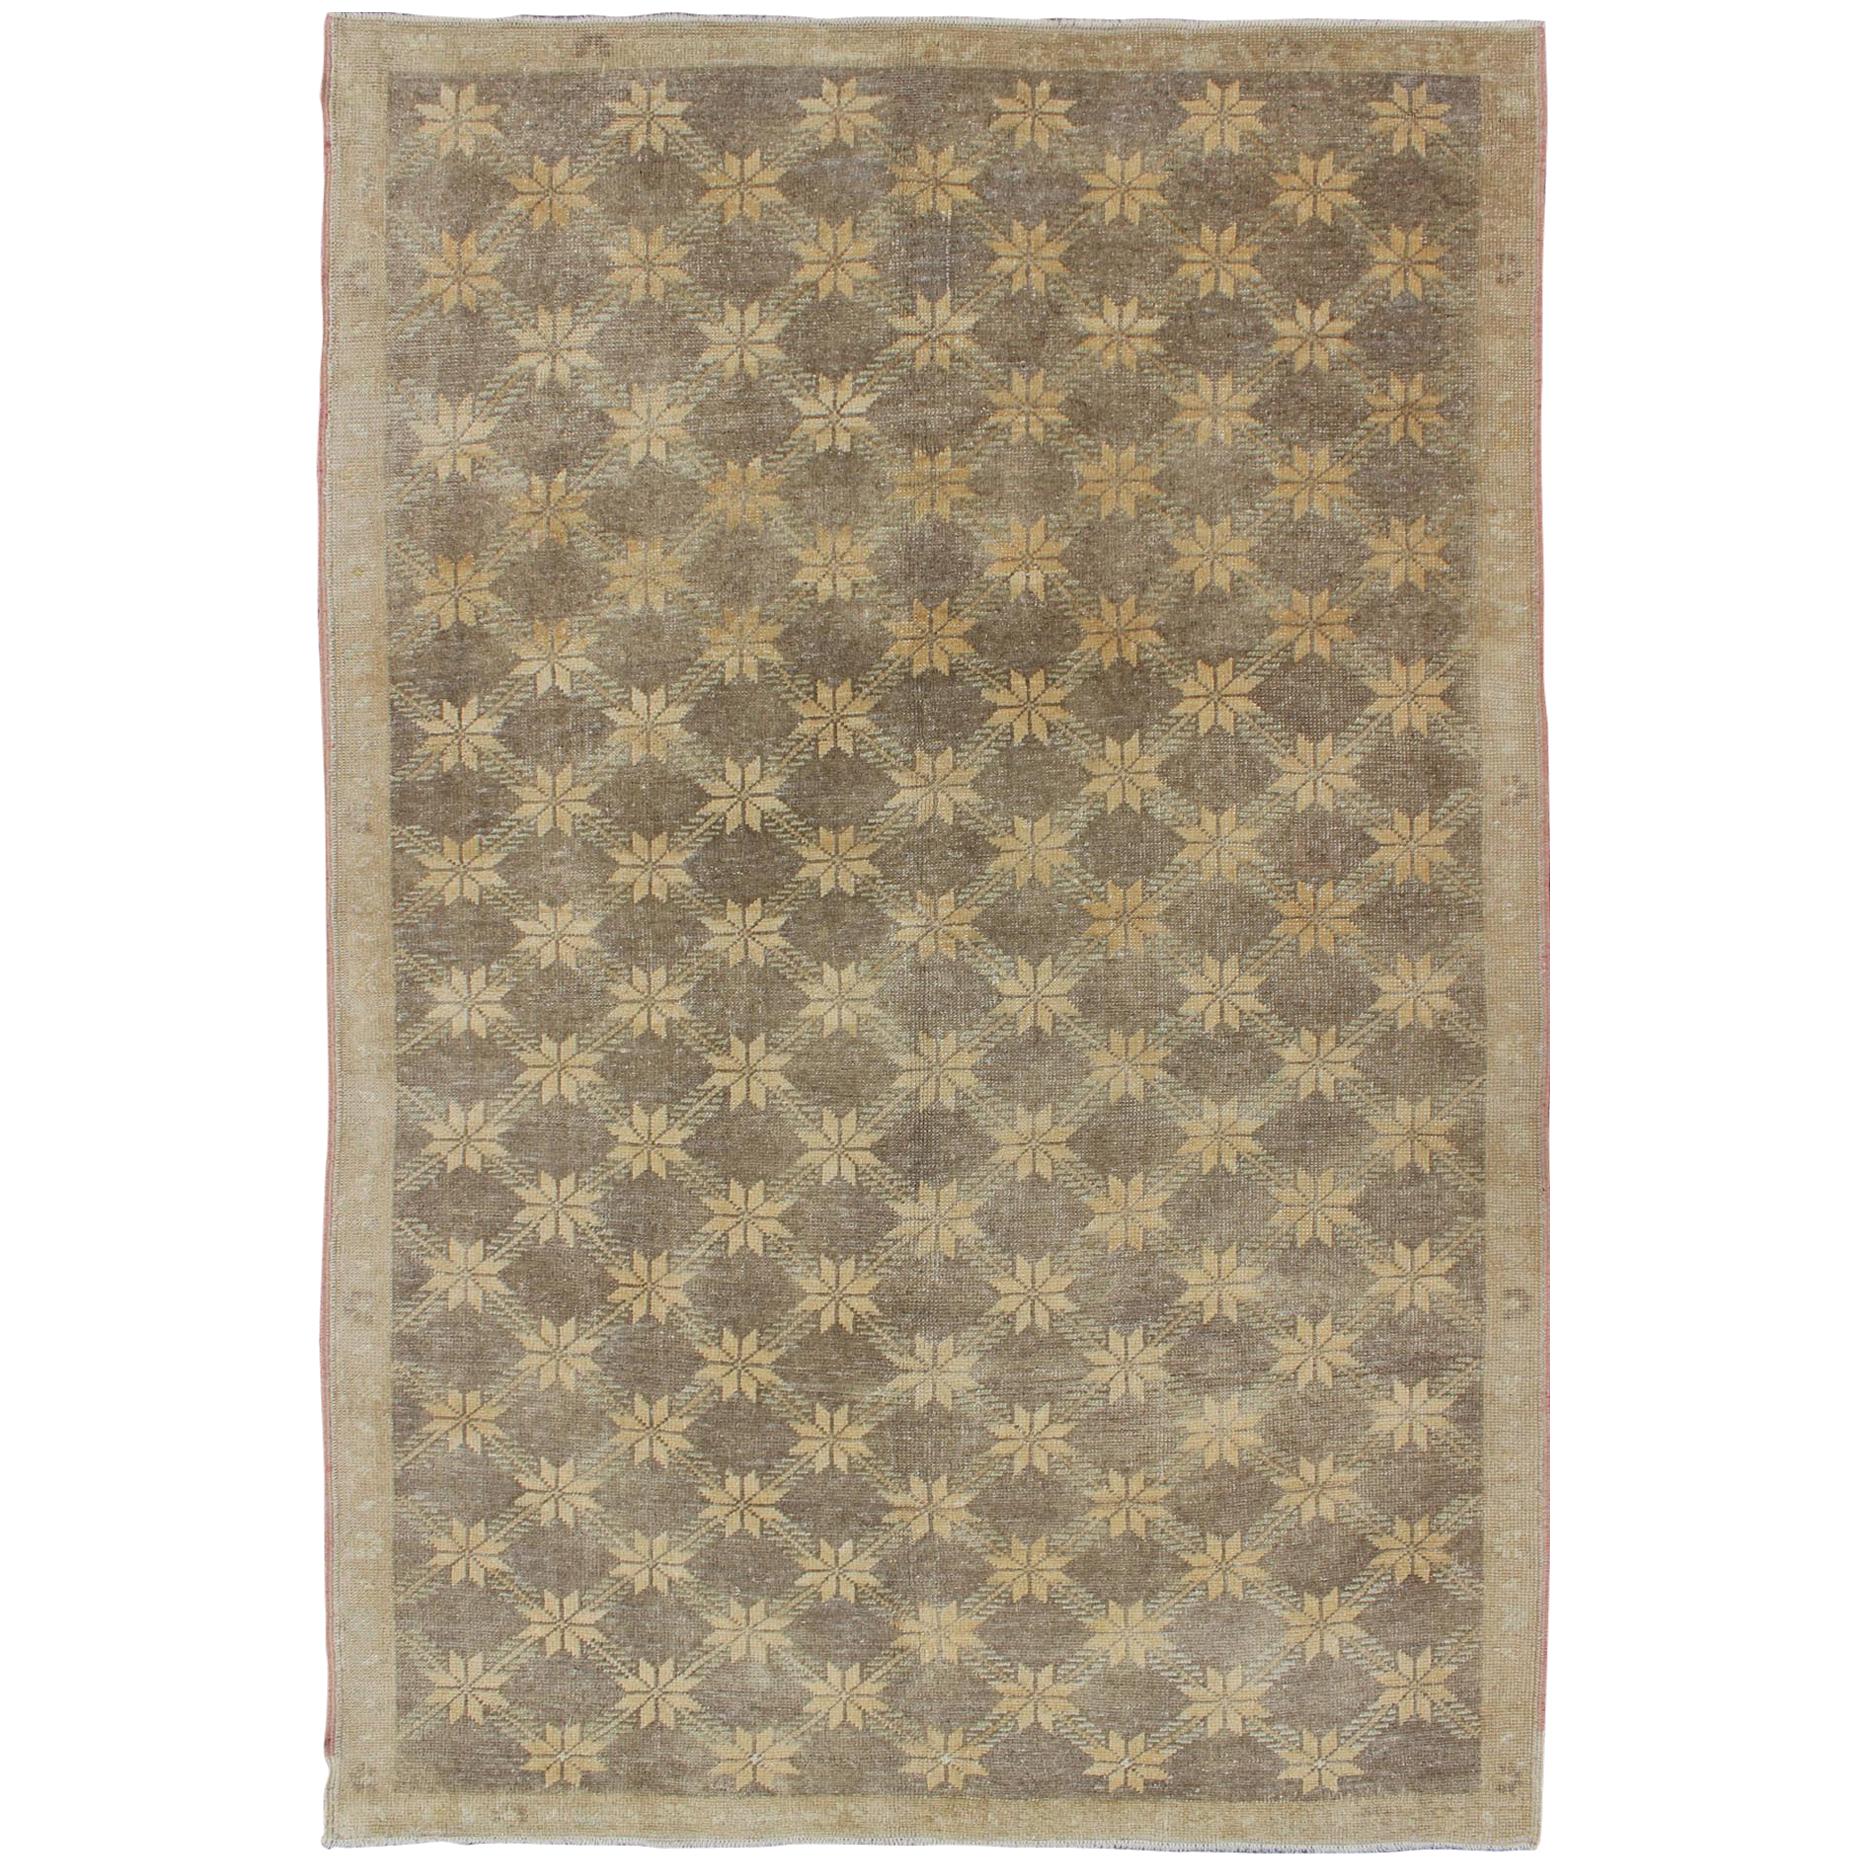 Brown Midcentury Vintage Turkish Oushak Rug with Floral or Star Lattice Pattern For Sale